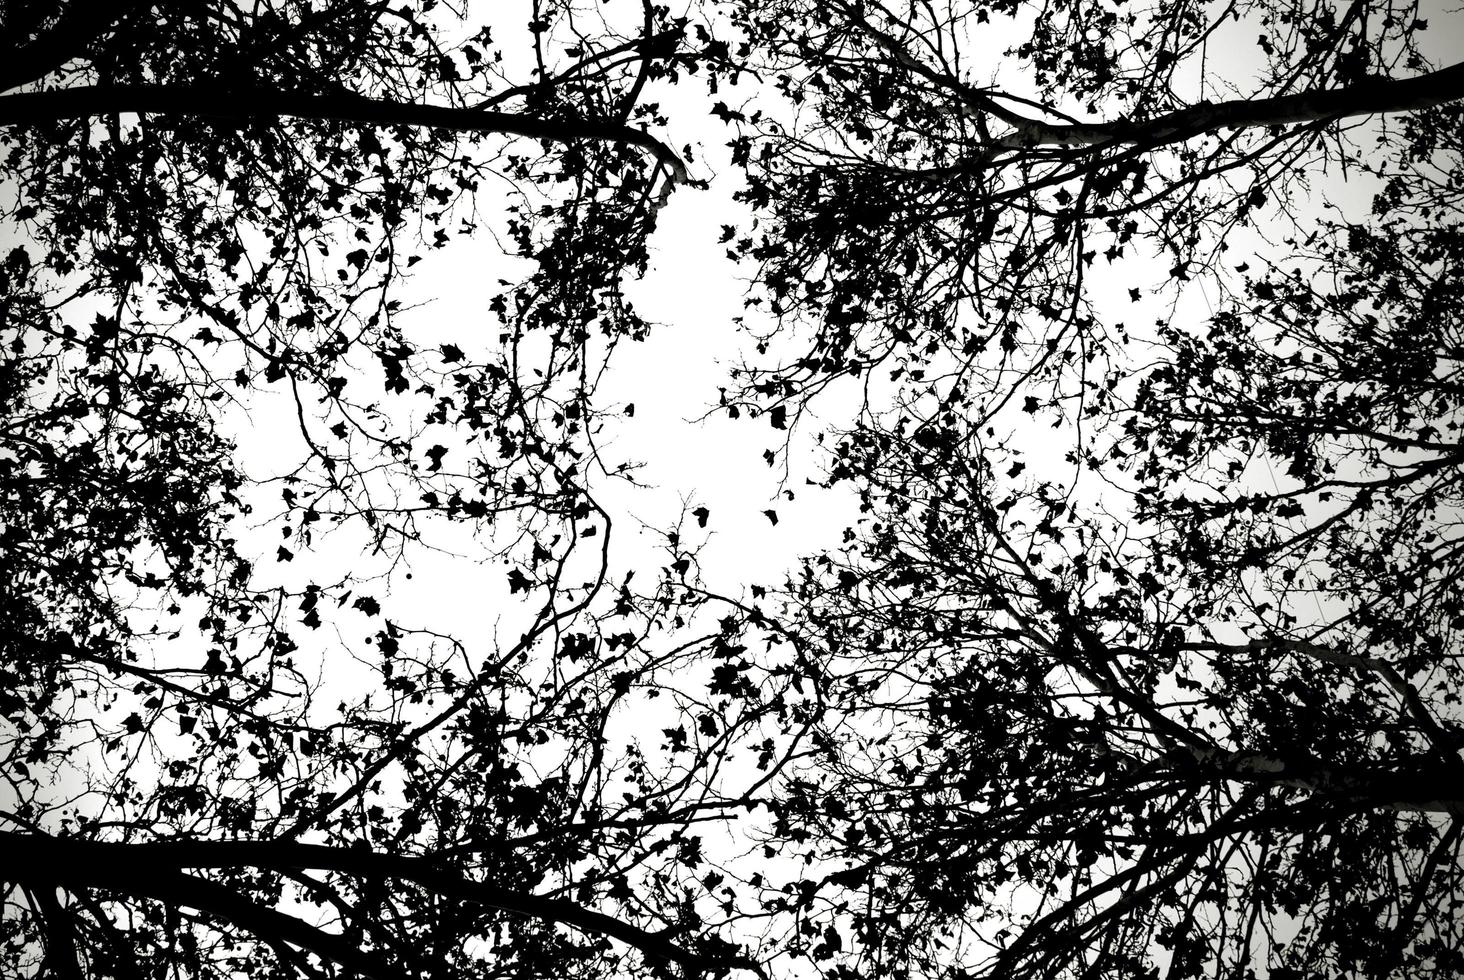 Ground view of tree branches in black and white photo